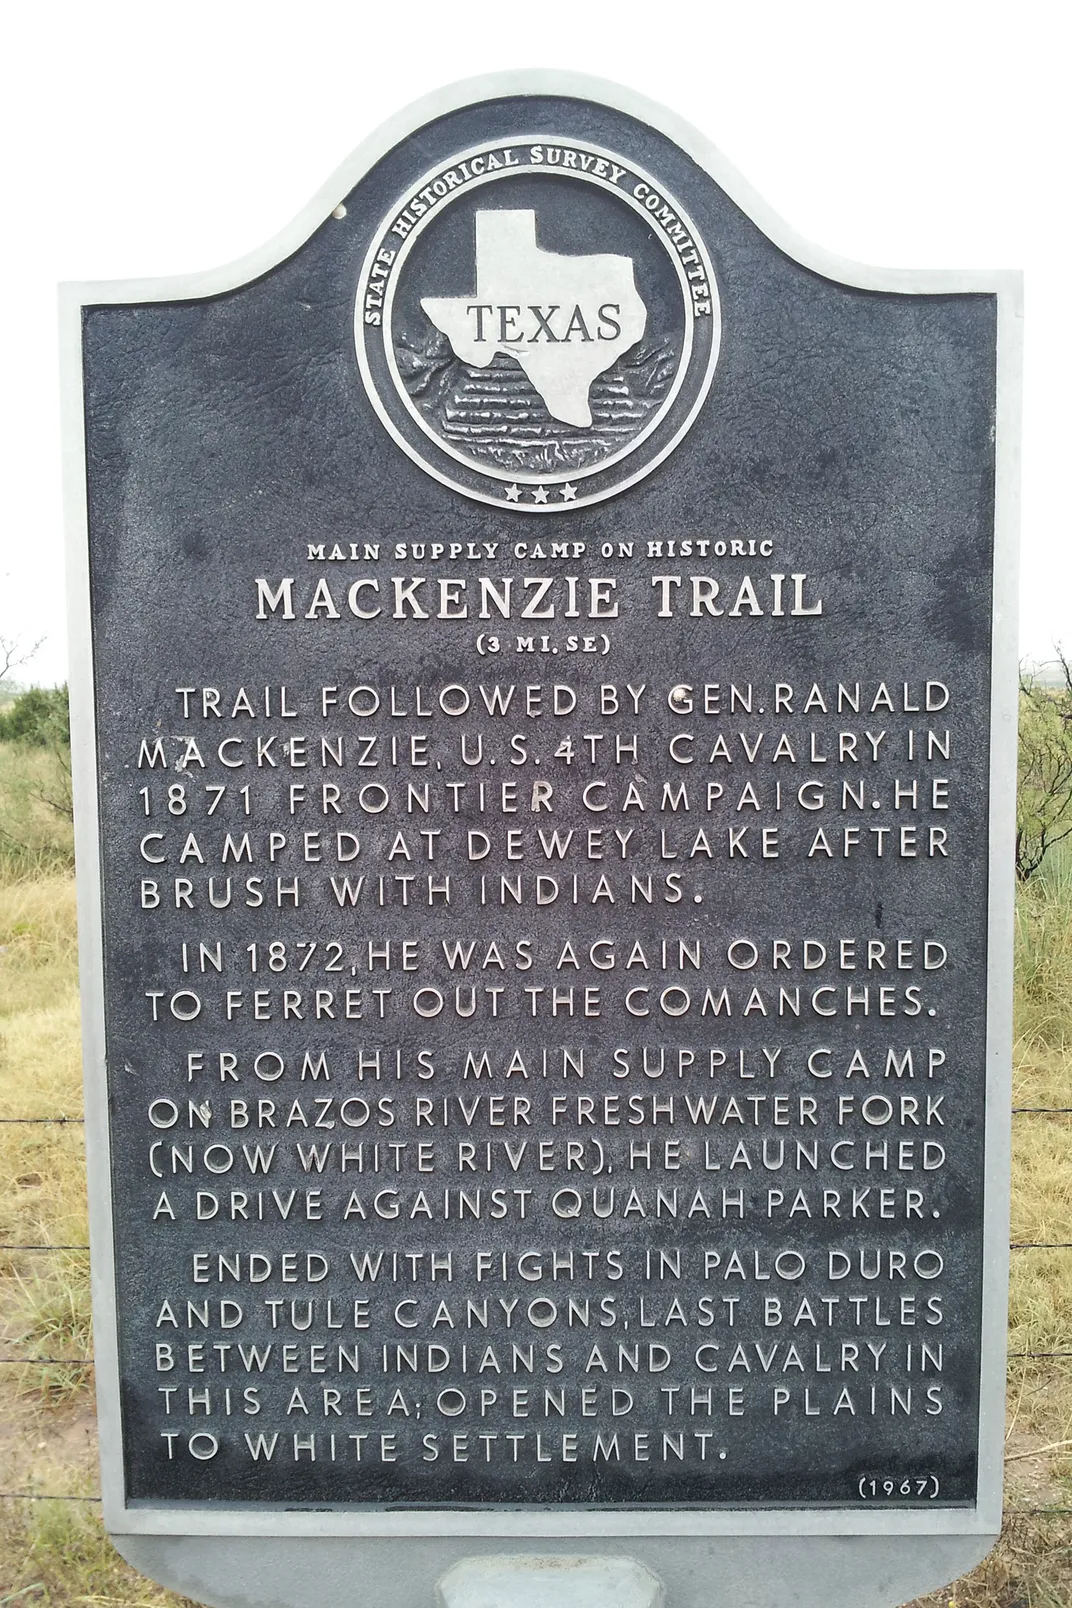 A historical marker in Texas